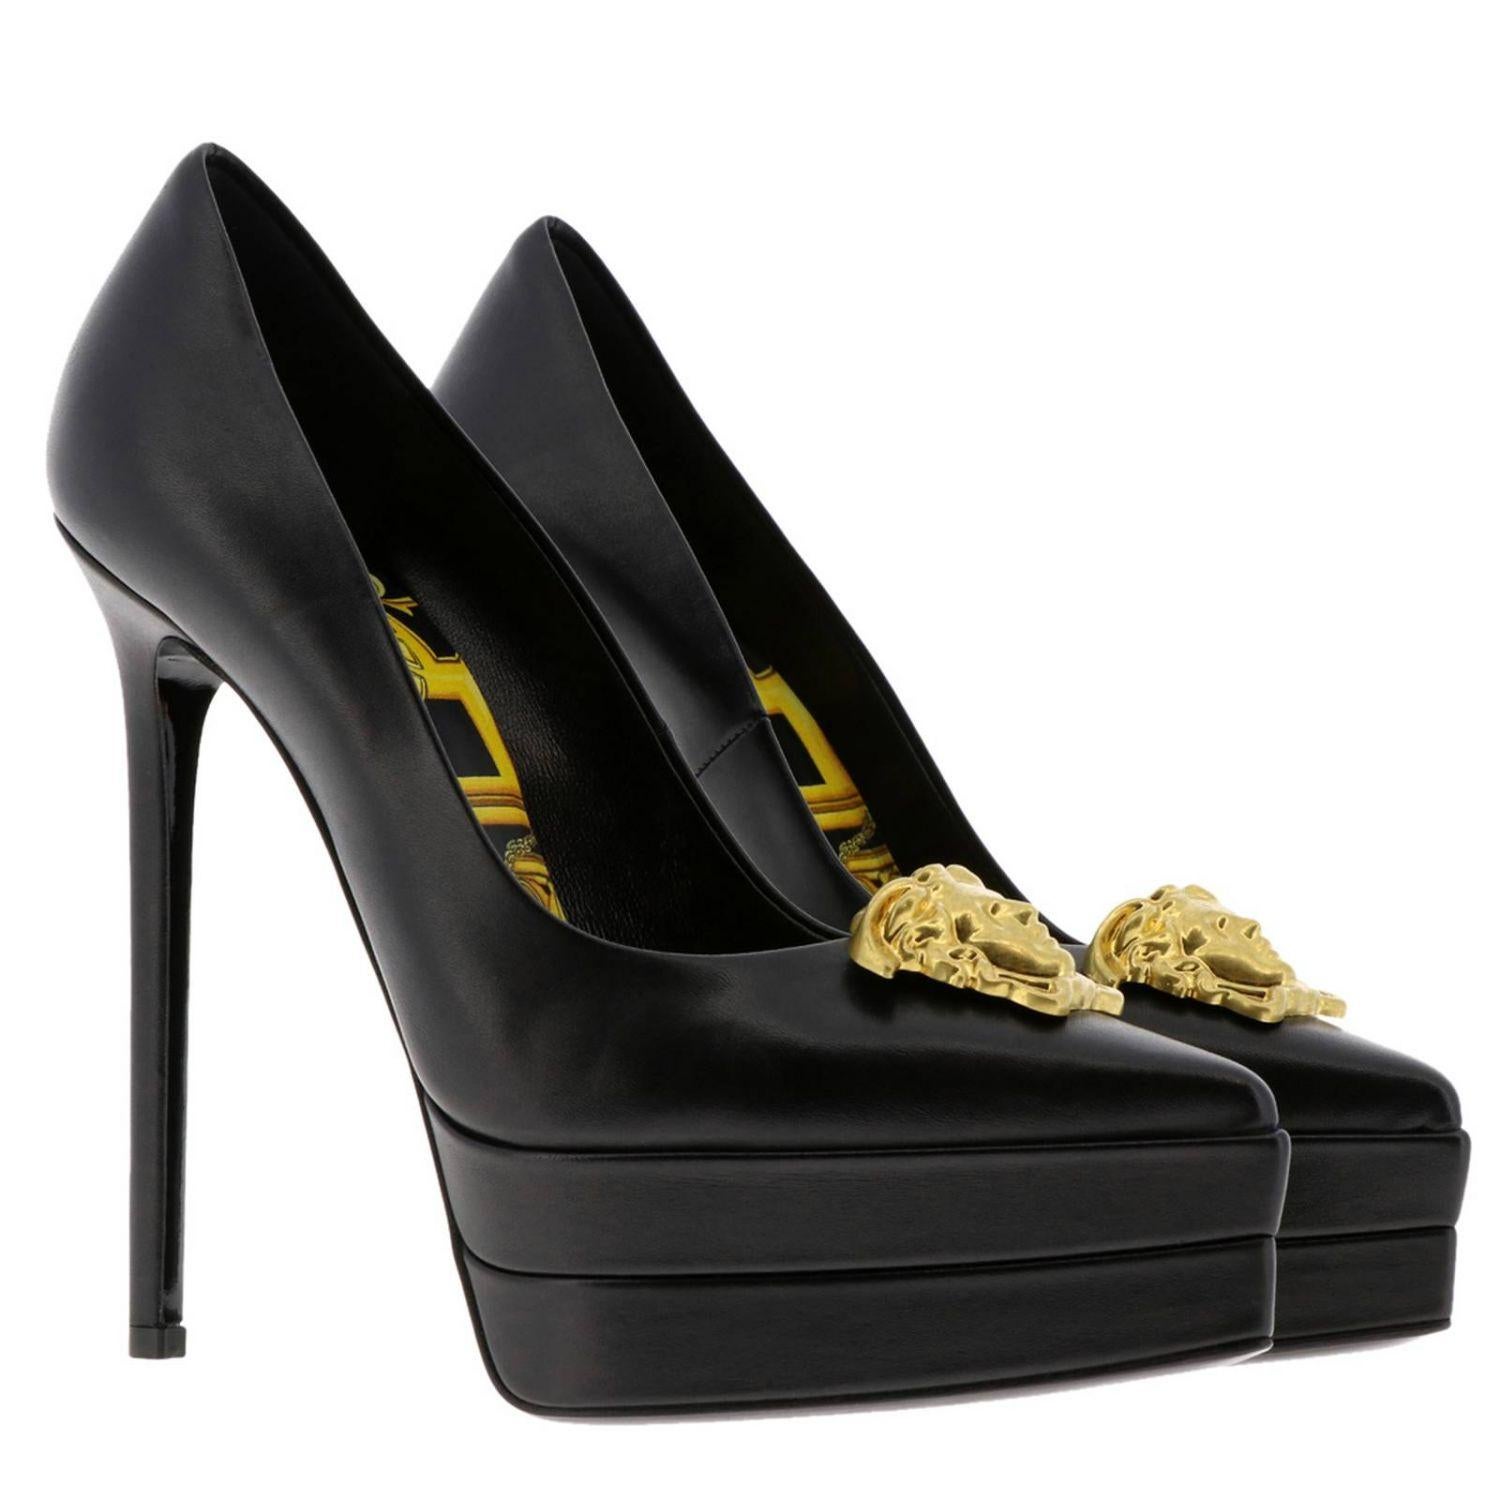 Versace Black Leather Gold Tone Medusa Palazzo Platform Stiletto Pump

Versace's Palazzo pumps are crafted from calfskin in black and sit on a platform to lend a leg-lengthening effect. These are topped with iconic Medusa head in gold-tone which